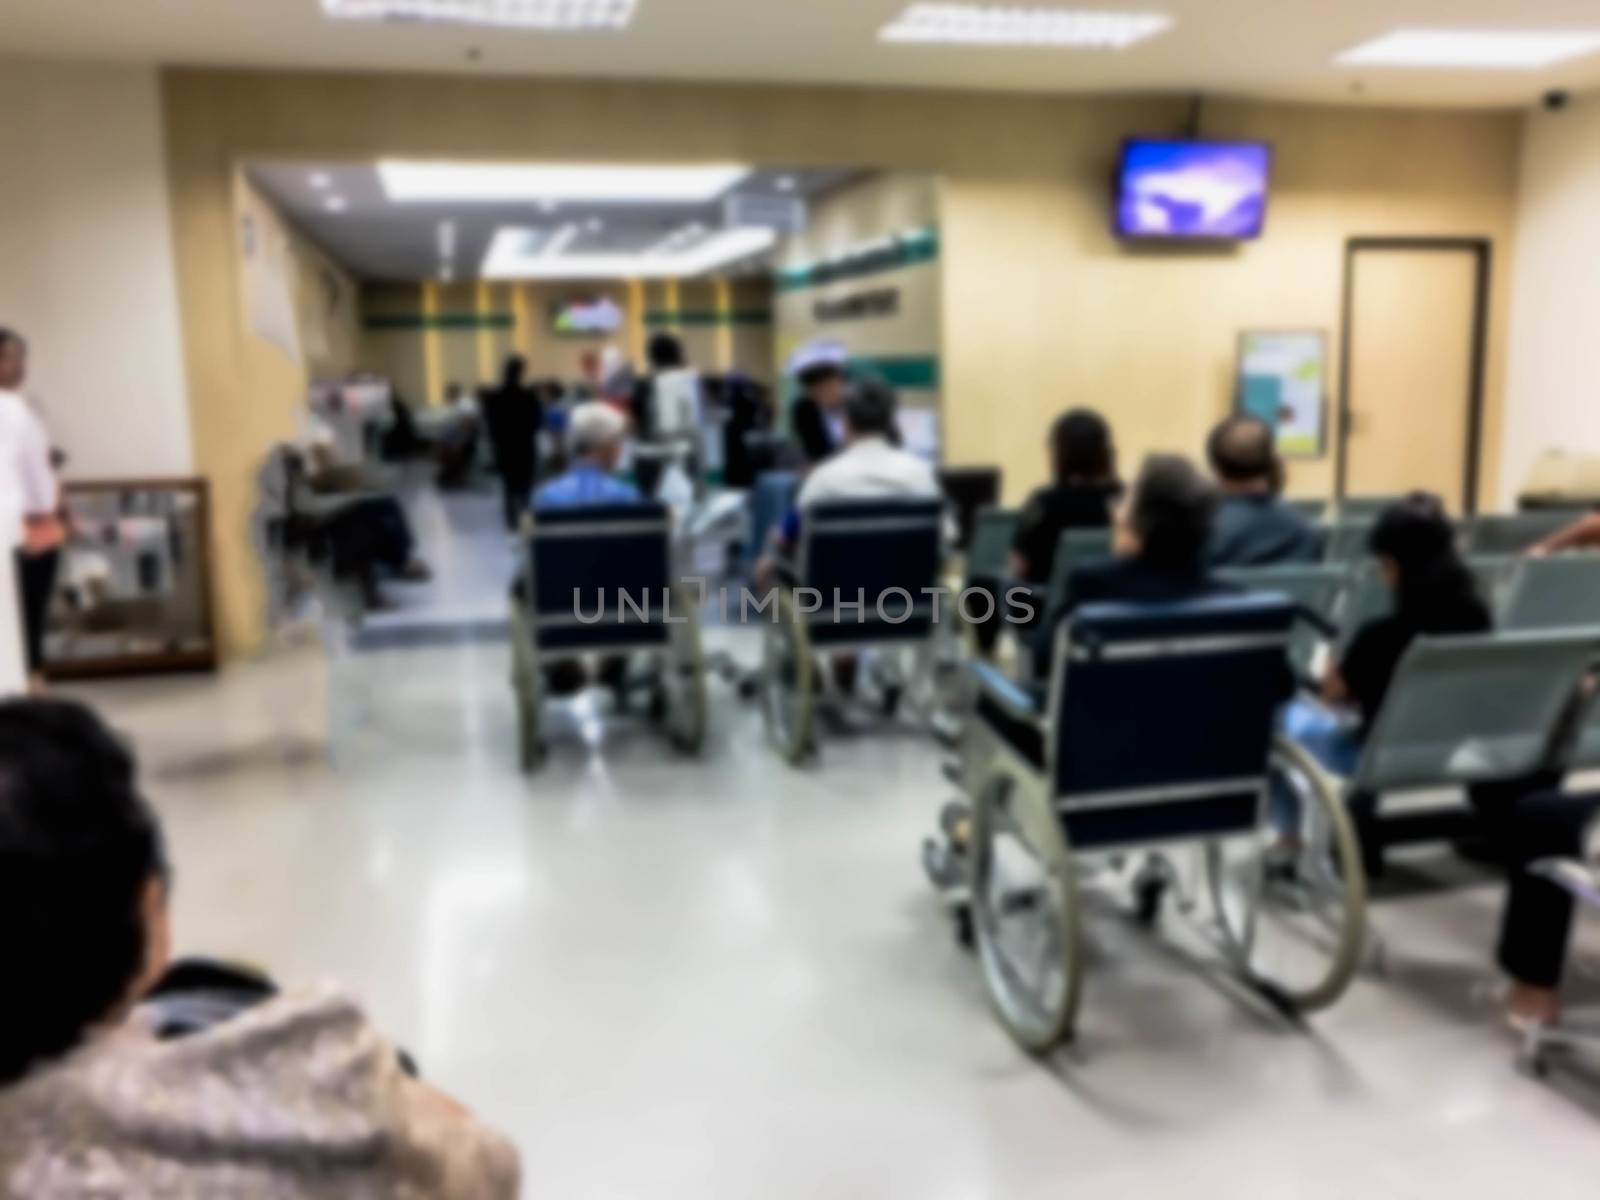 Blurry people in the hospital